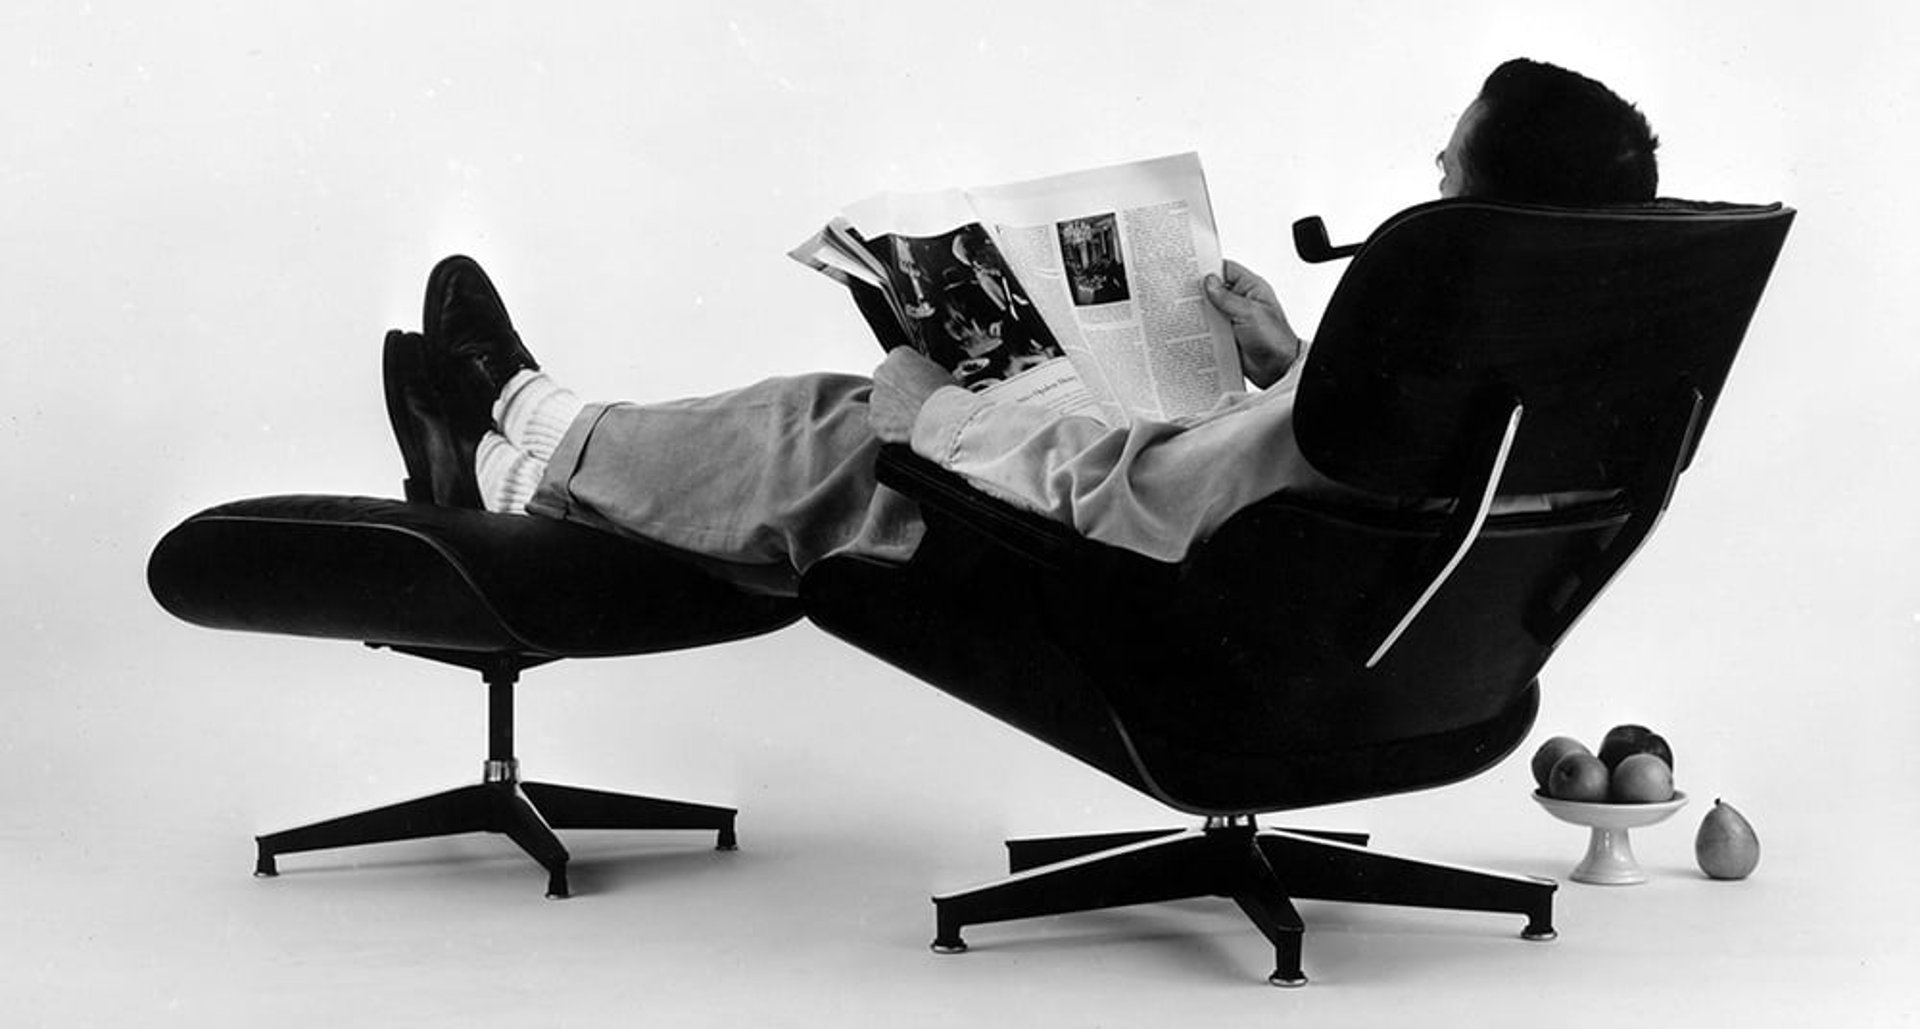 What you've always wanted to know about Charles and Ray Eames